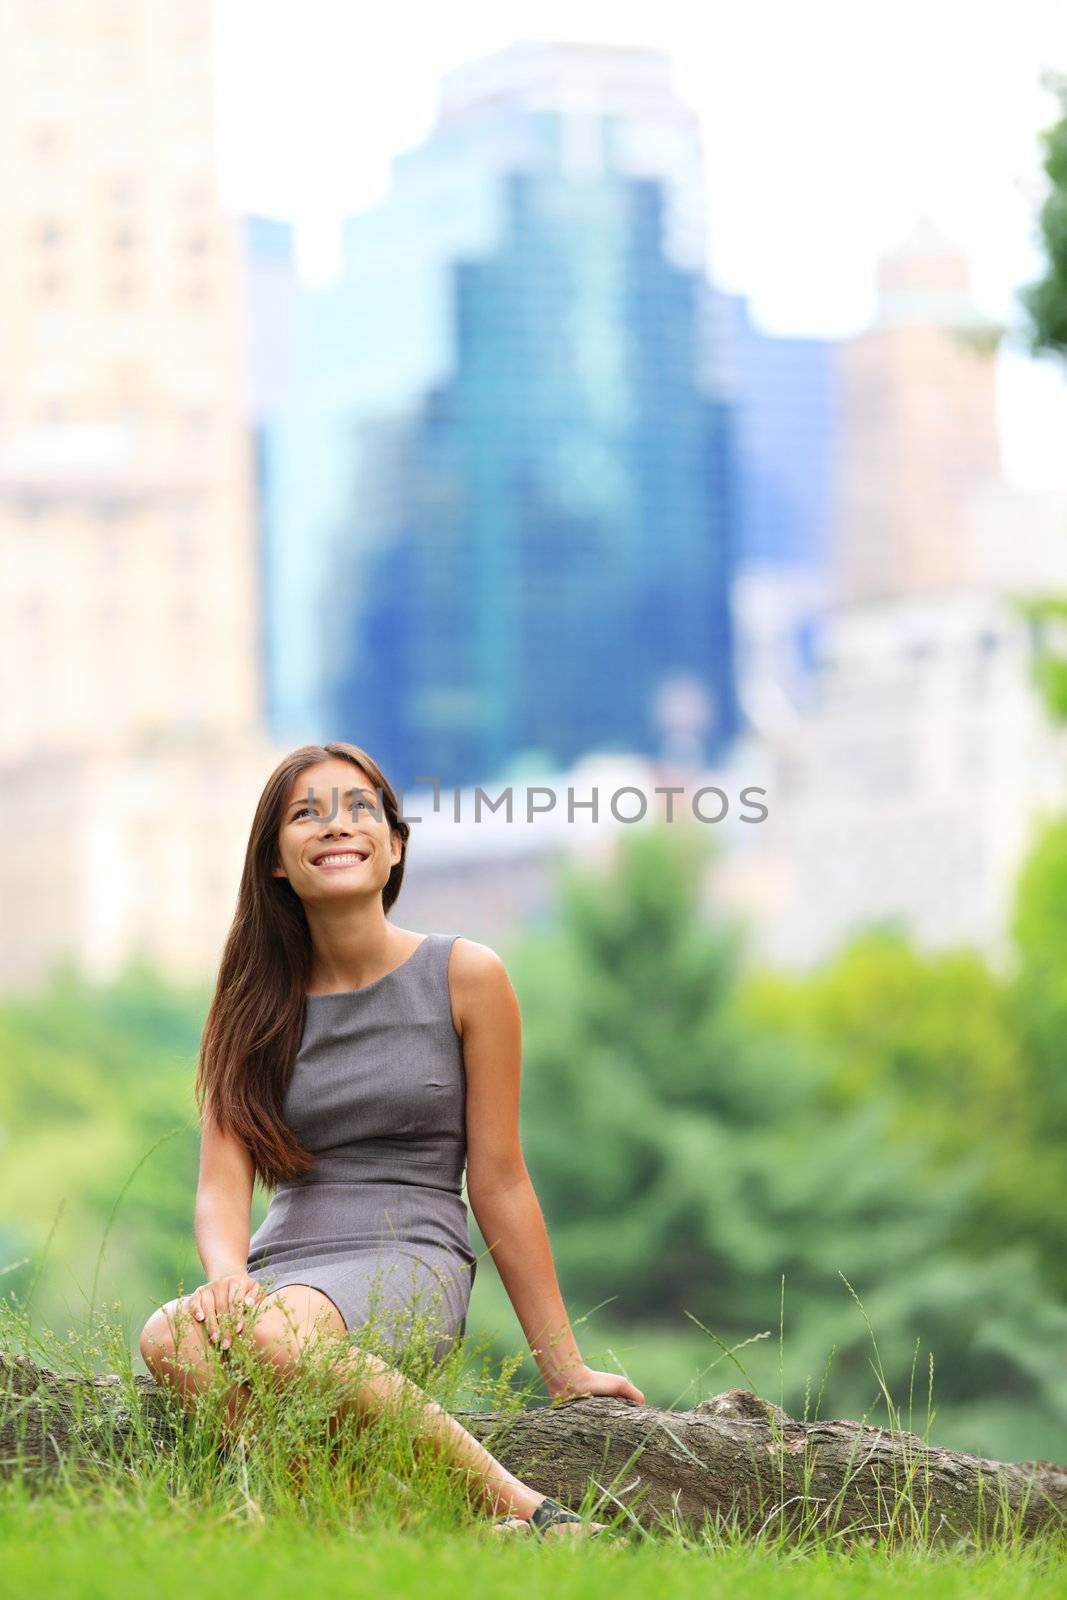 Young Asian Business woman in New York Central Park. Businesswoman in New York City, Manhattan, Central Park sitting looking up at copy space with skyscraper buildings from New York skyline in background. Young female professional. Mixed Caucasian / Asian race.